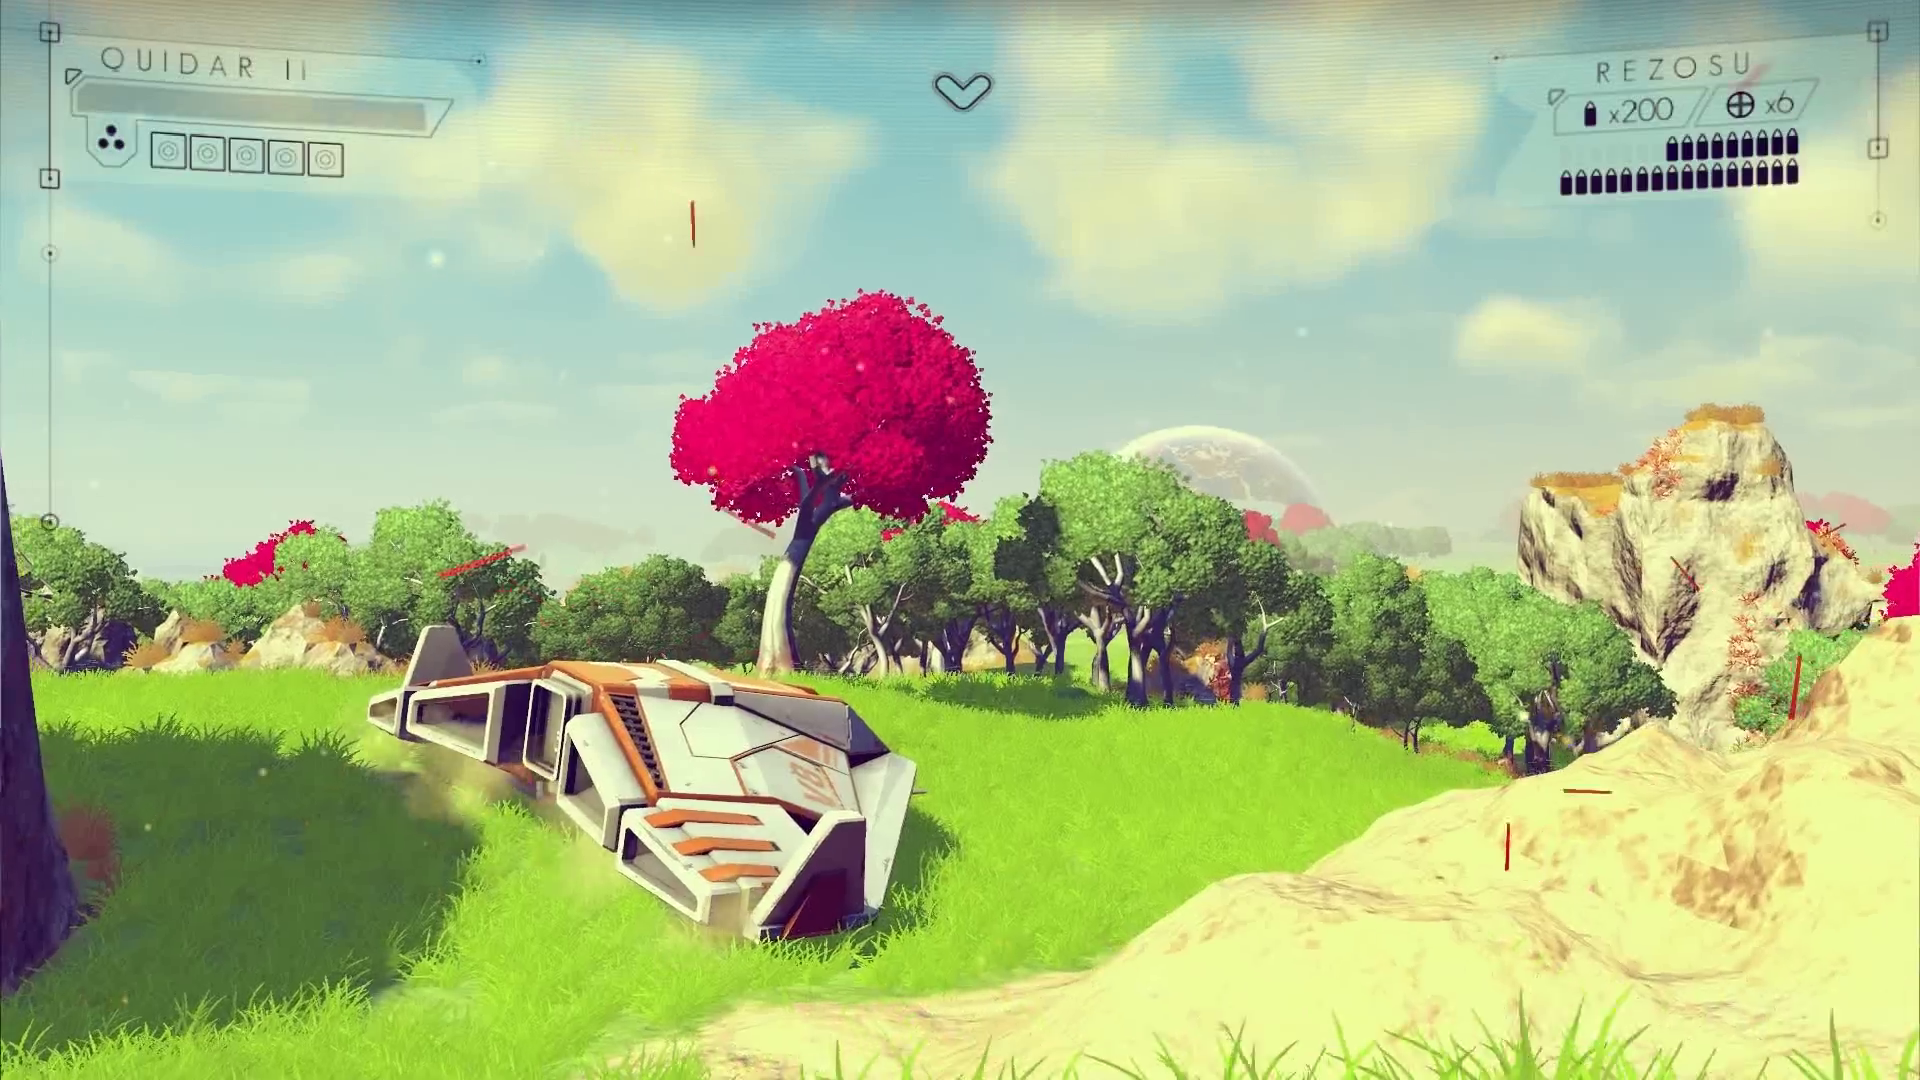 It’ll Take You Five Billion Years to See Every Planet in No Man’s Sky